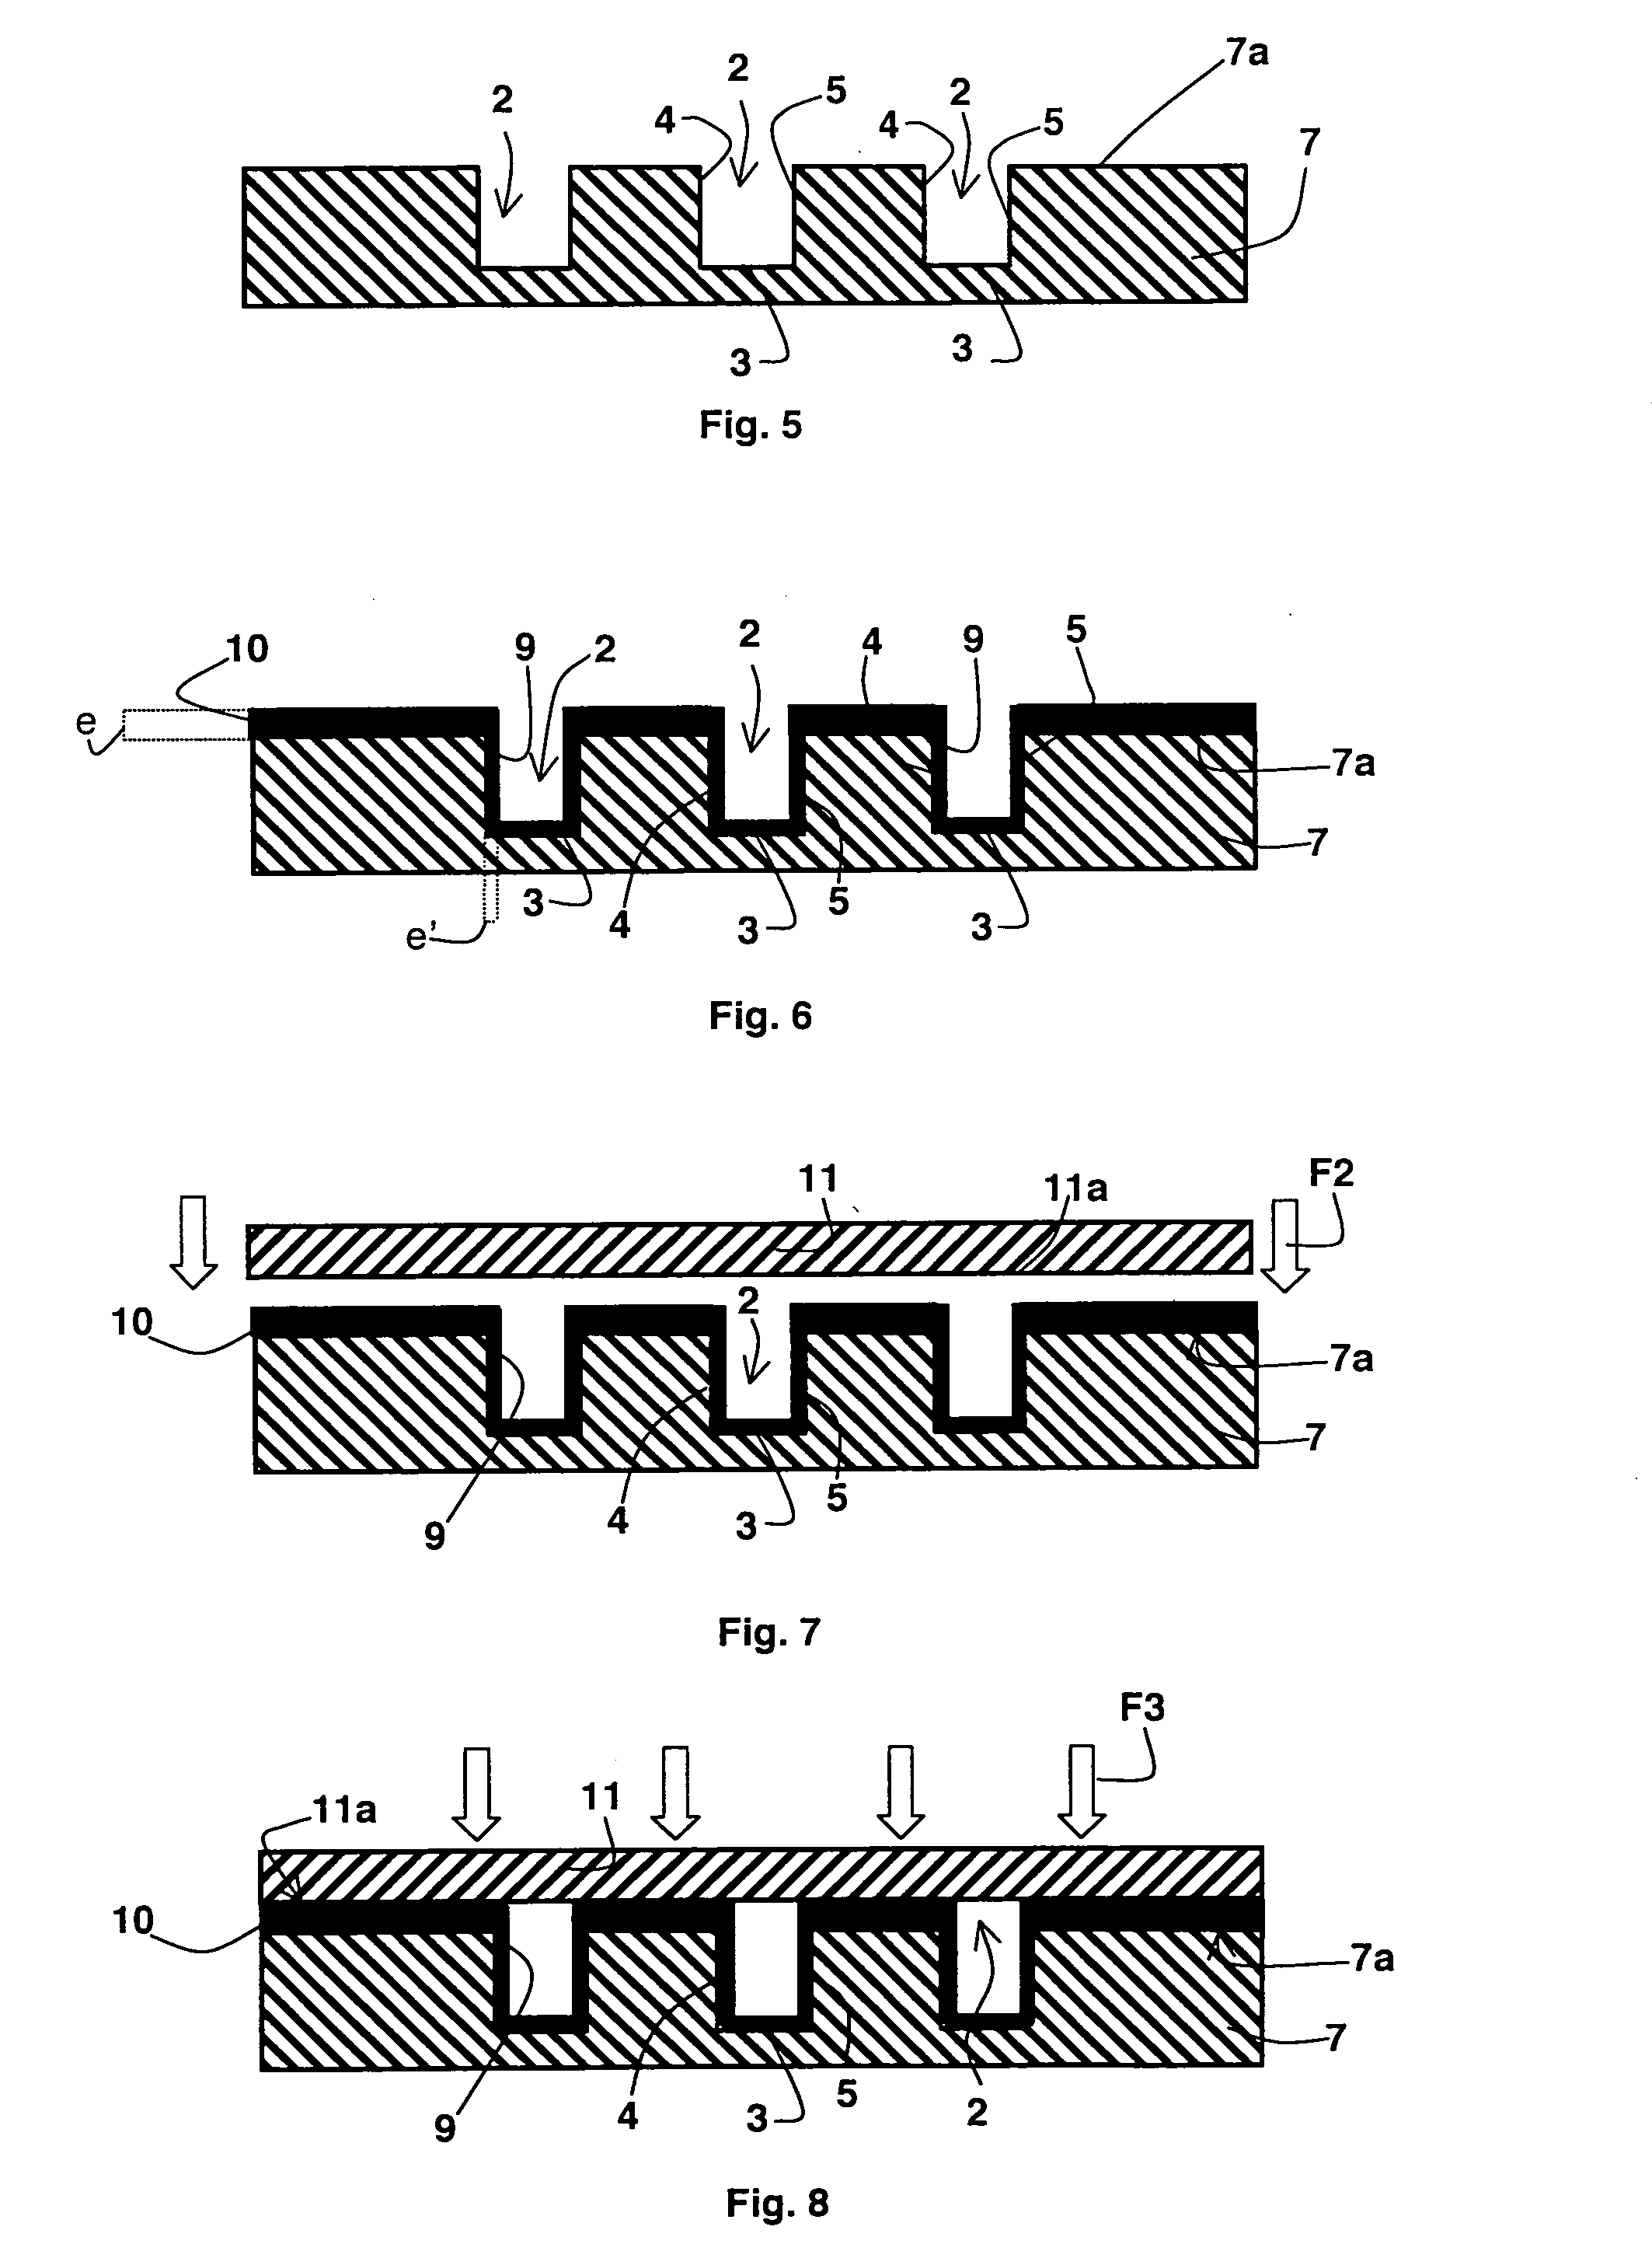 Method for fabricating a microfluidic component comprising at least one microchannel filled with nanostructures